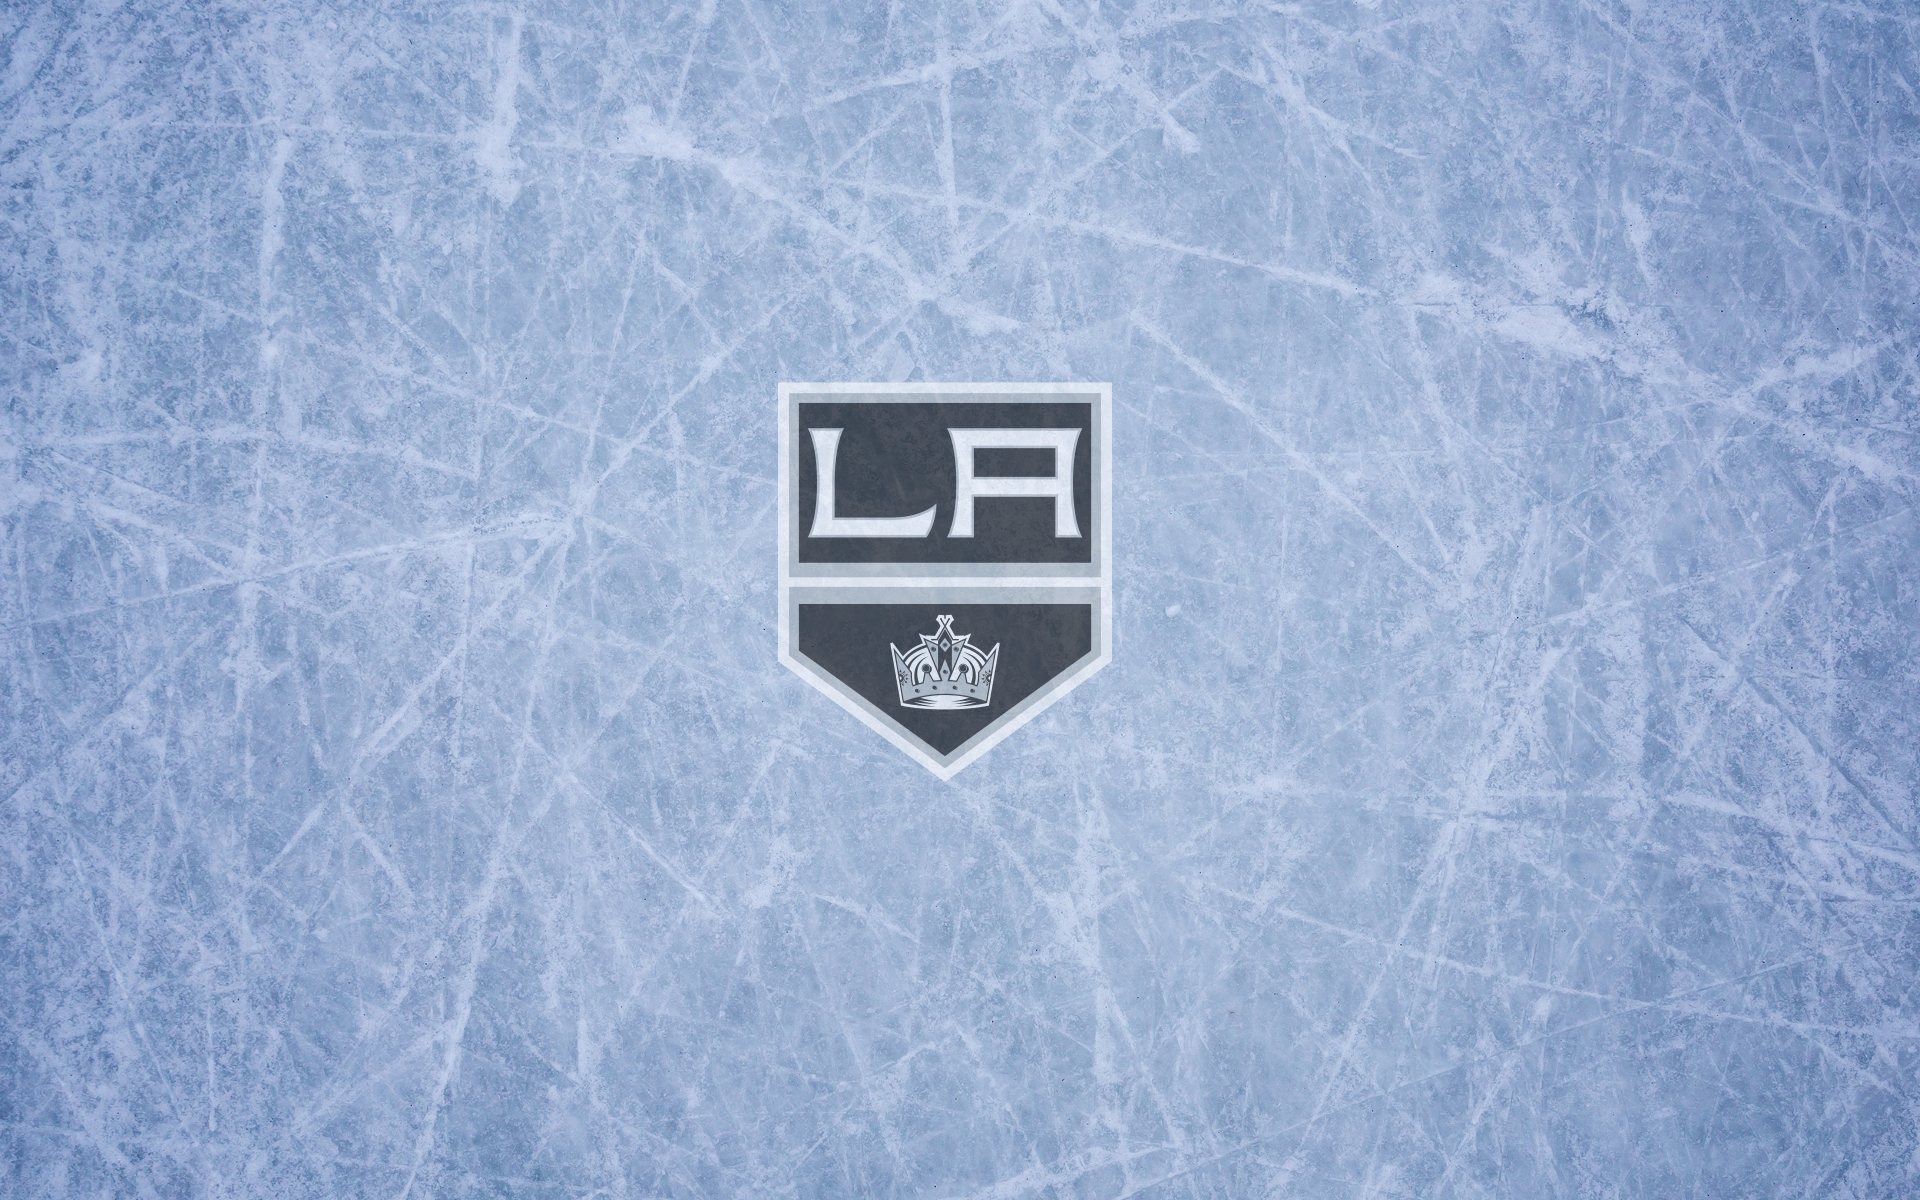 Los Angeles Kings wallpaper, ice and logo, widescreen 1920× 16